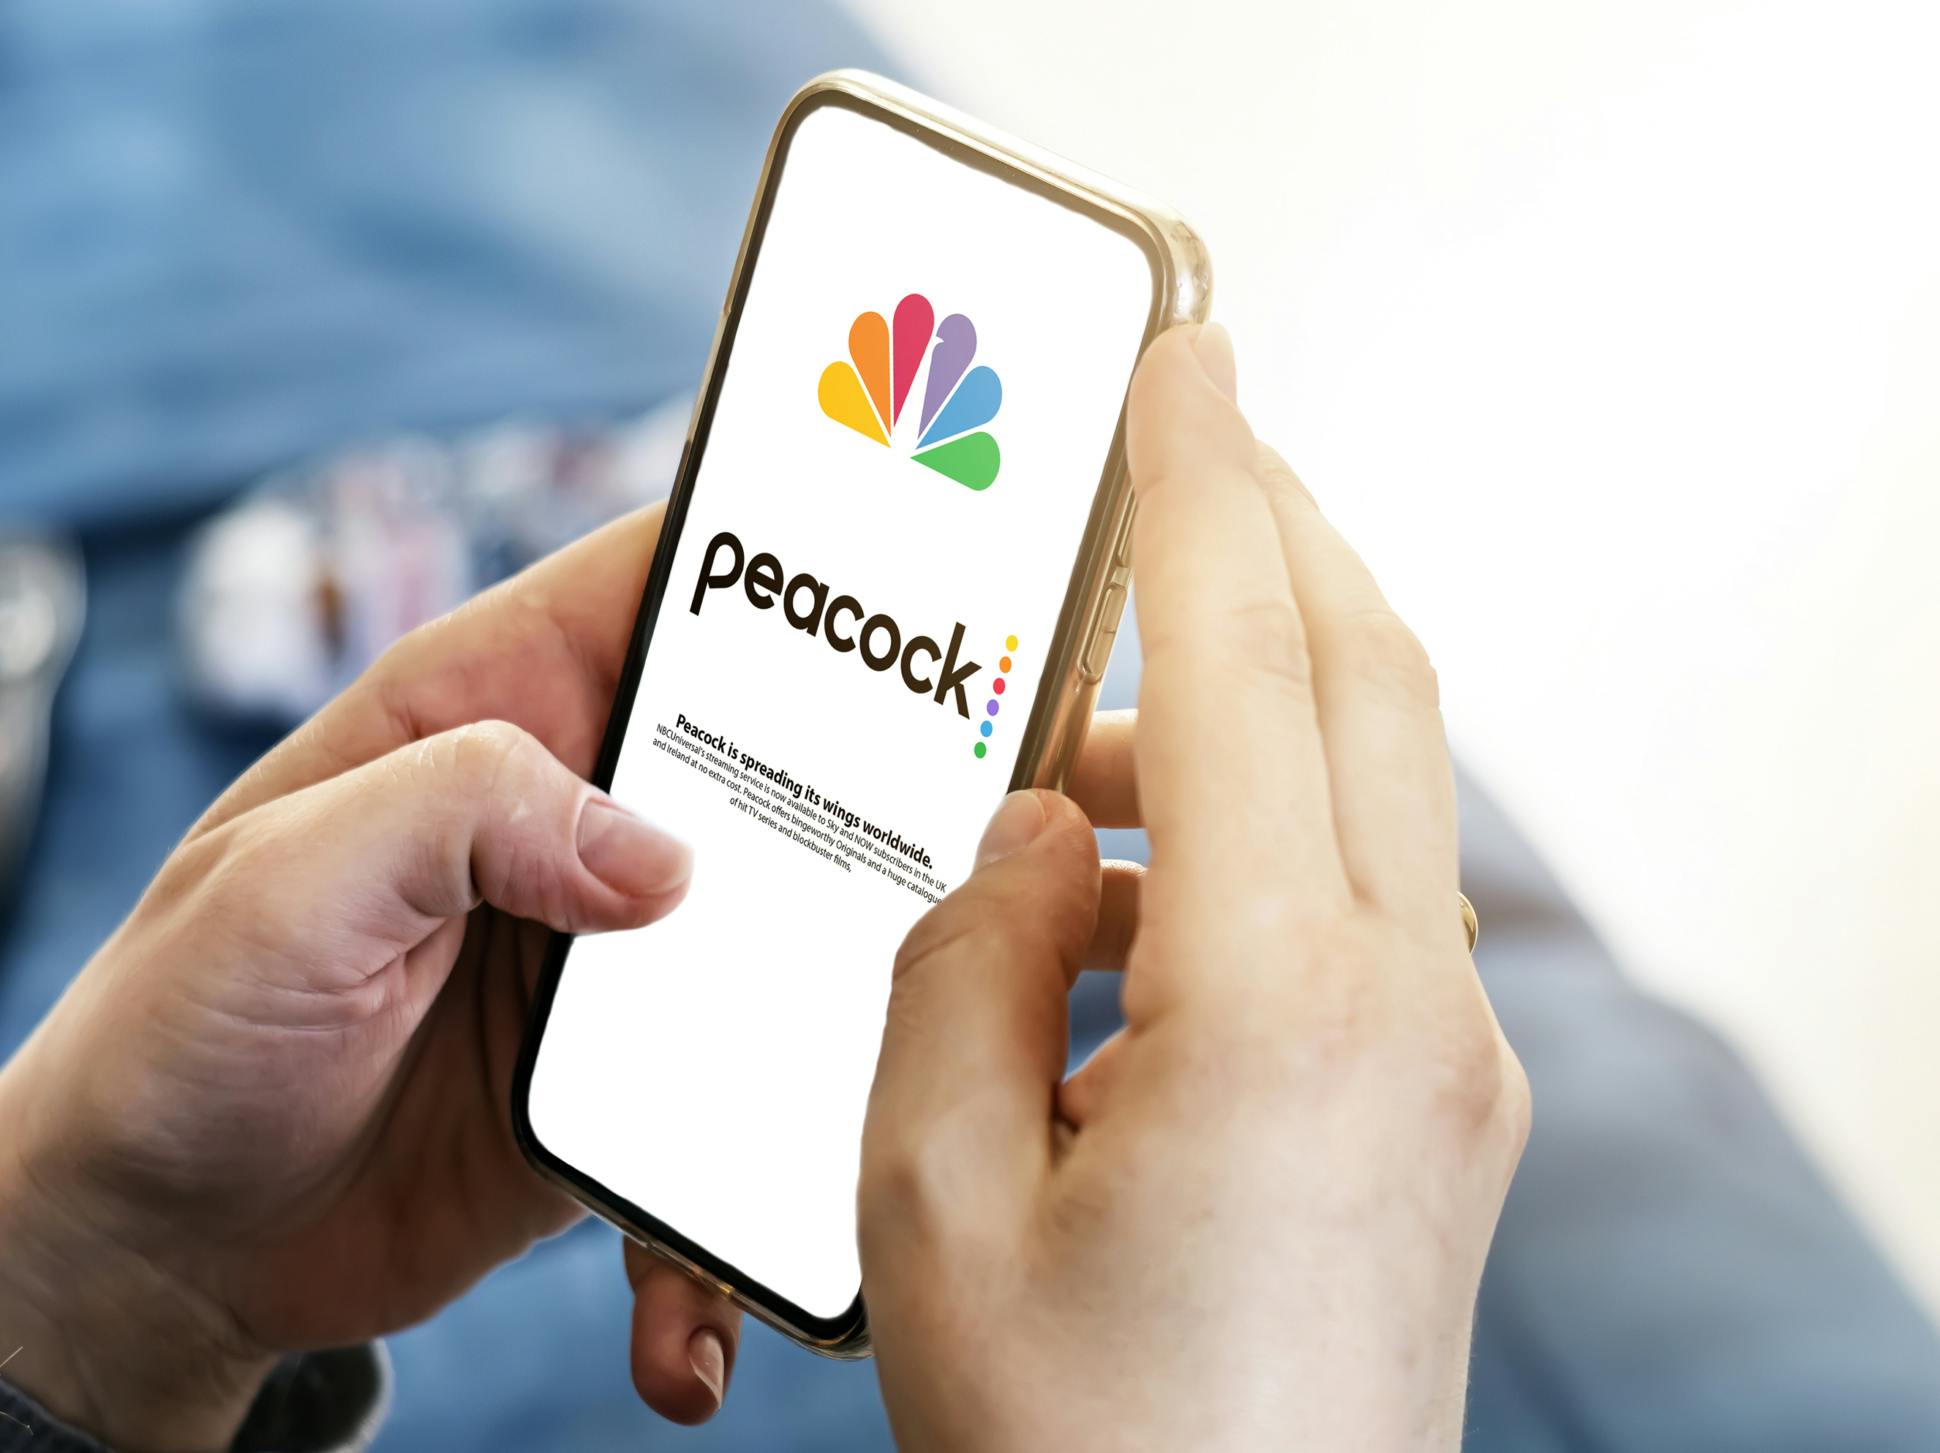 Can you get peacock on mediacom